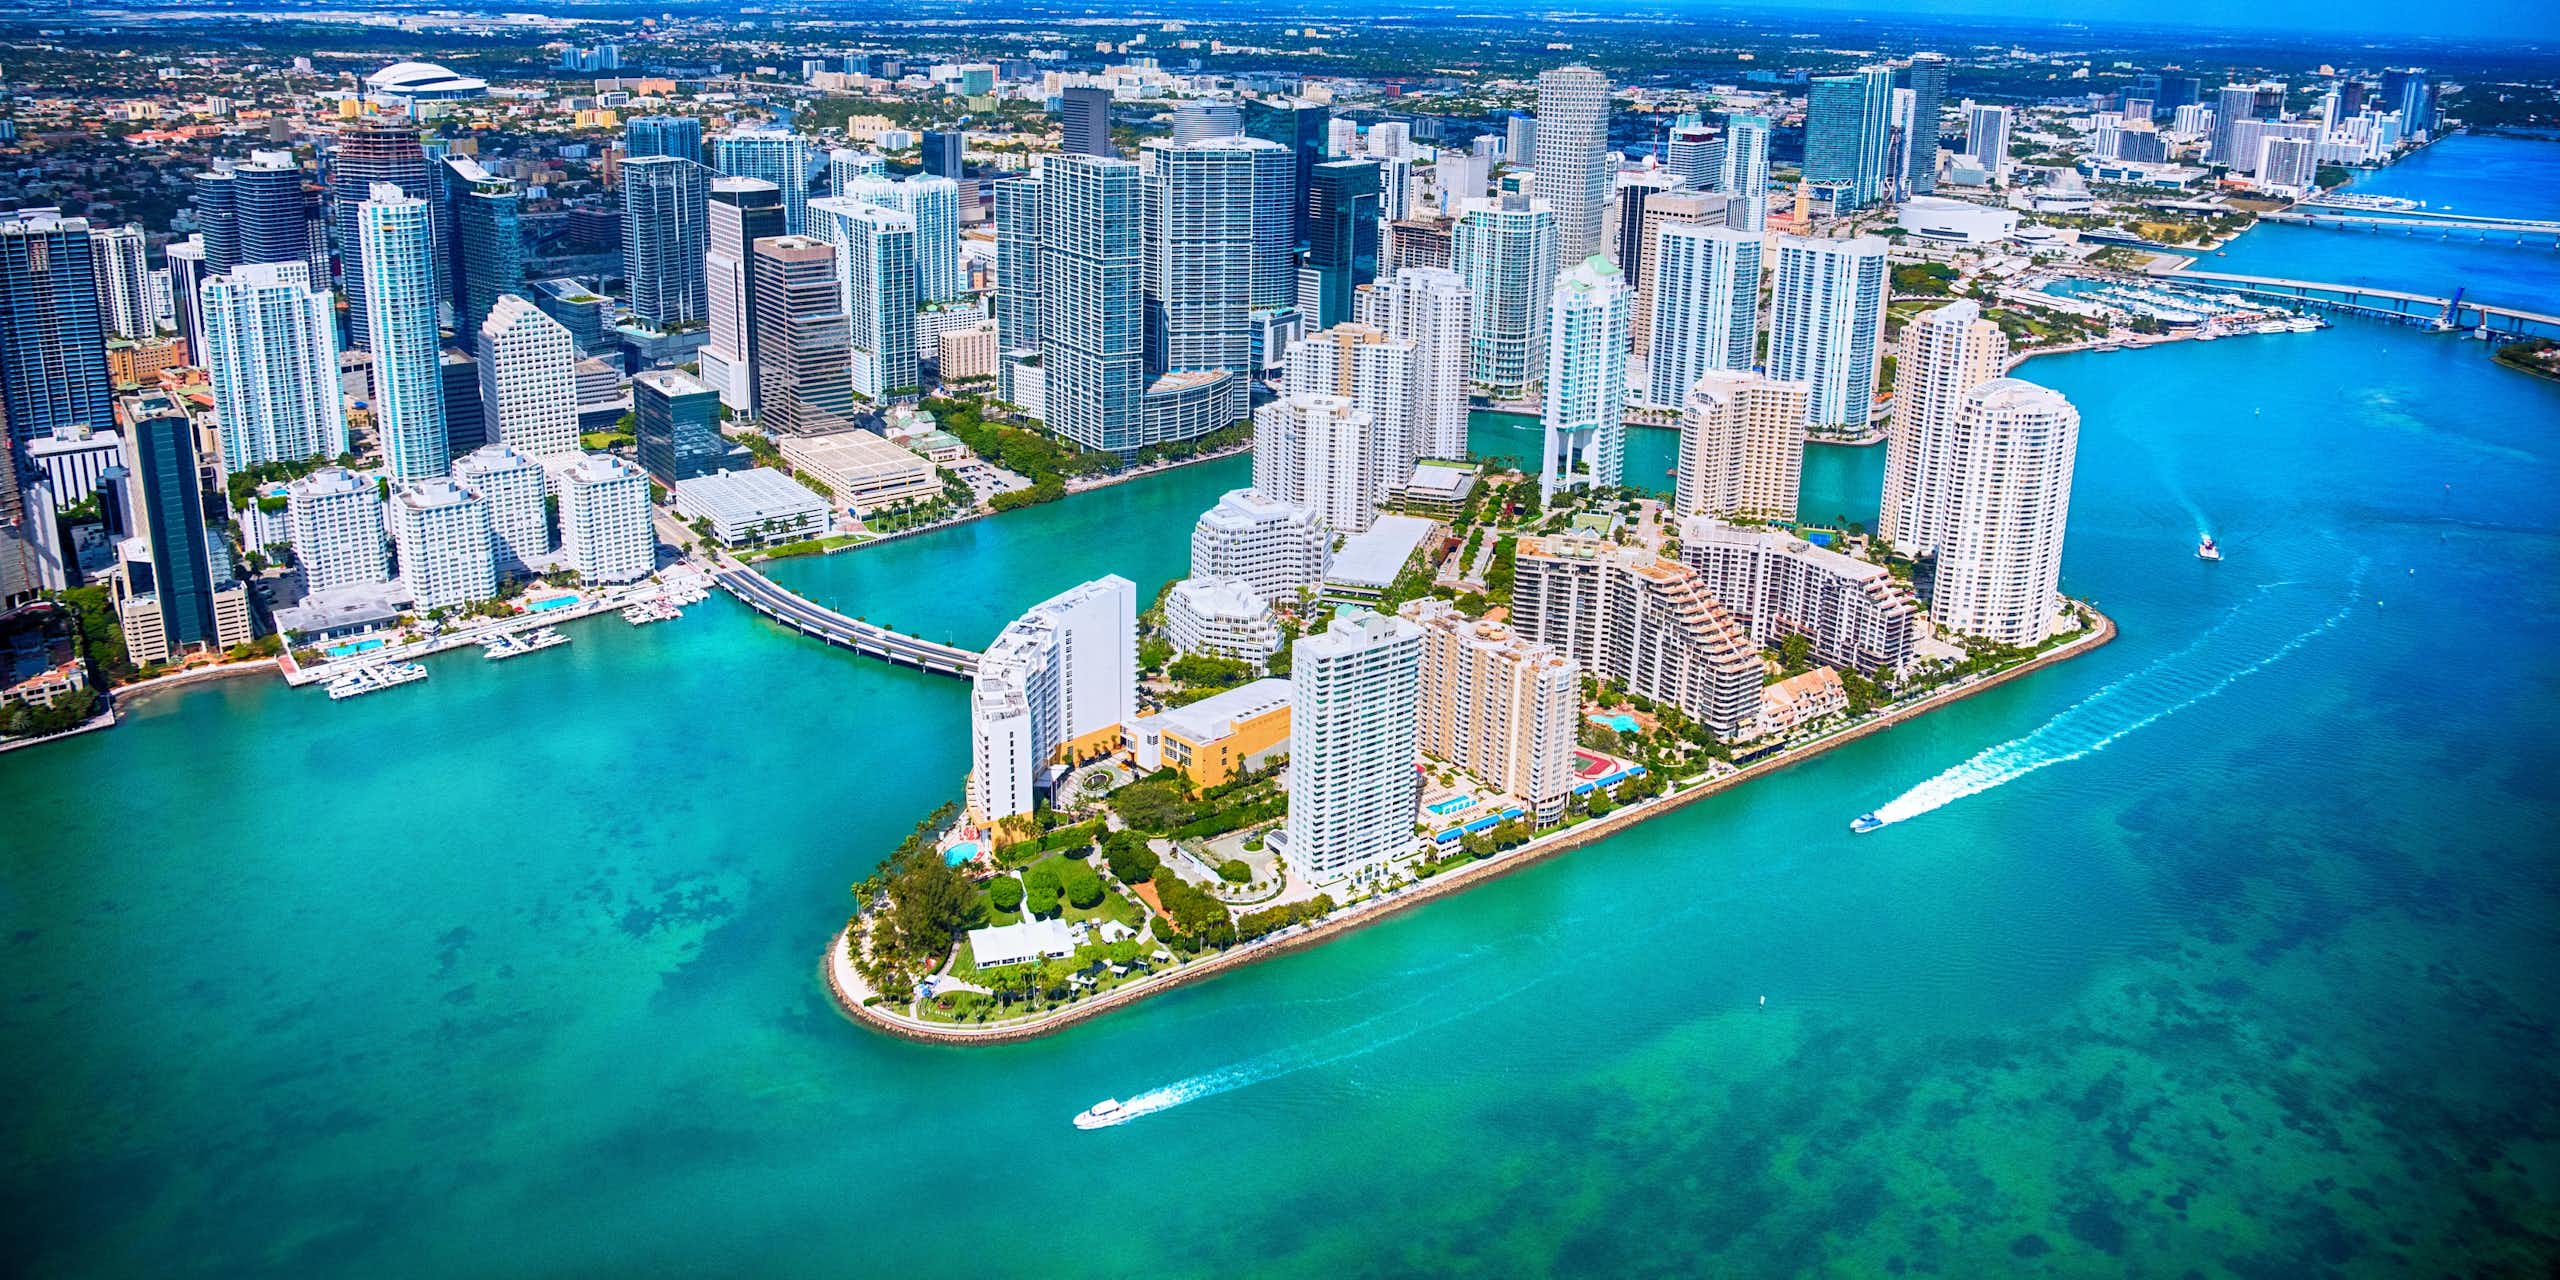 A helicopter of view of Miami's gleaming office towers over Biscayne Bay, where boats are running through the channels.